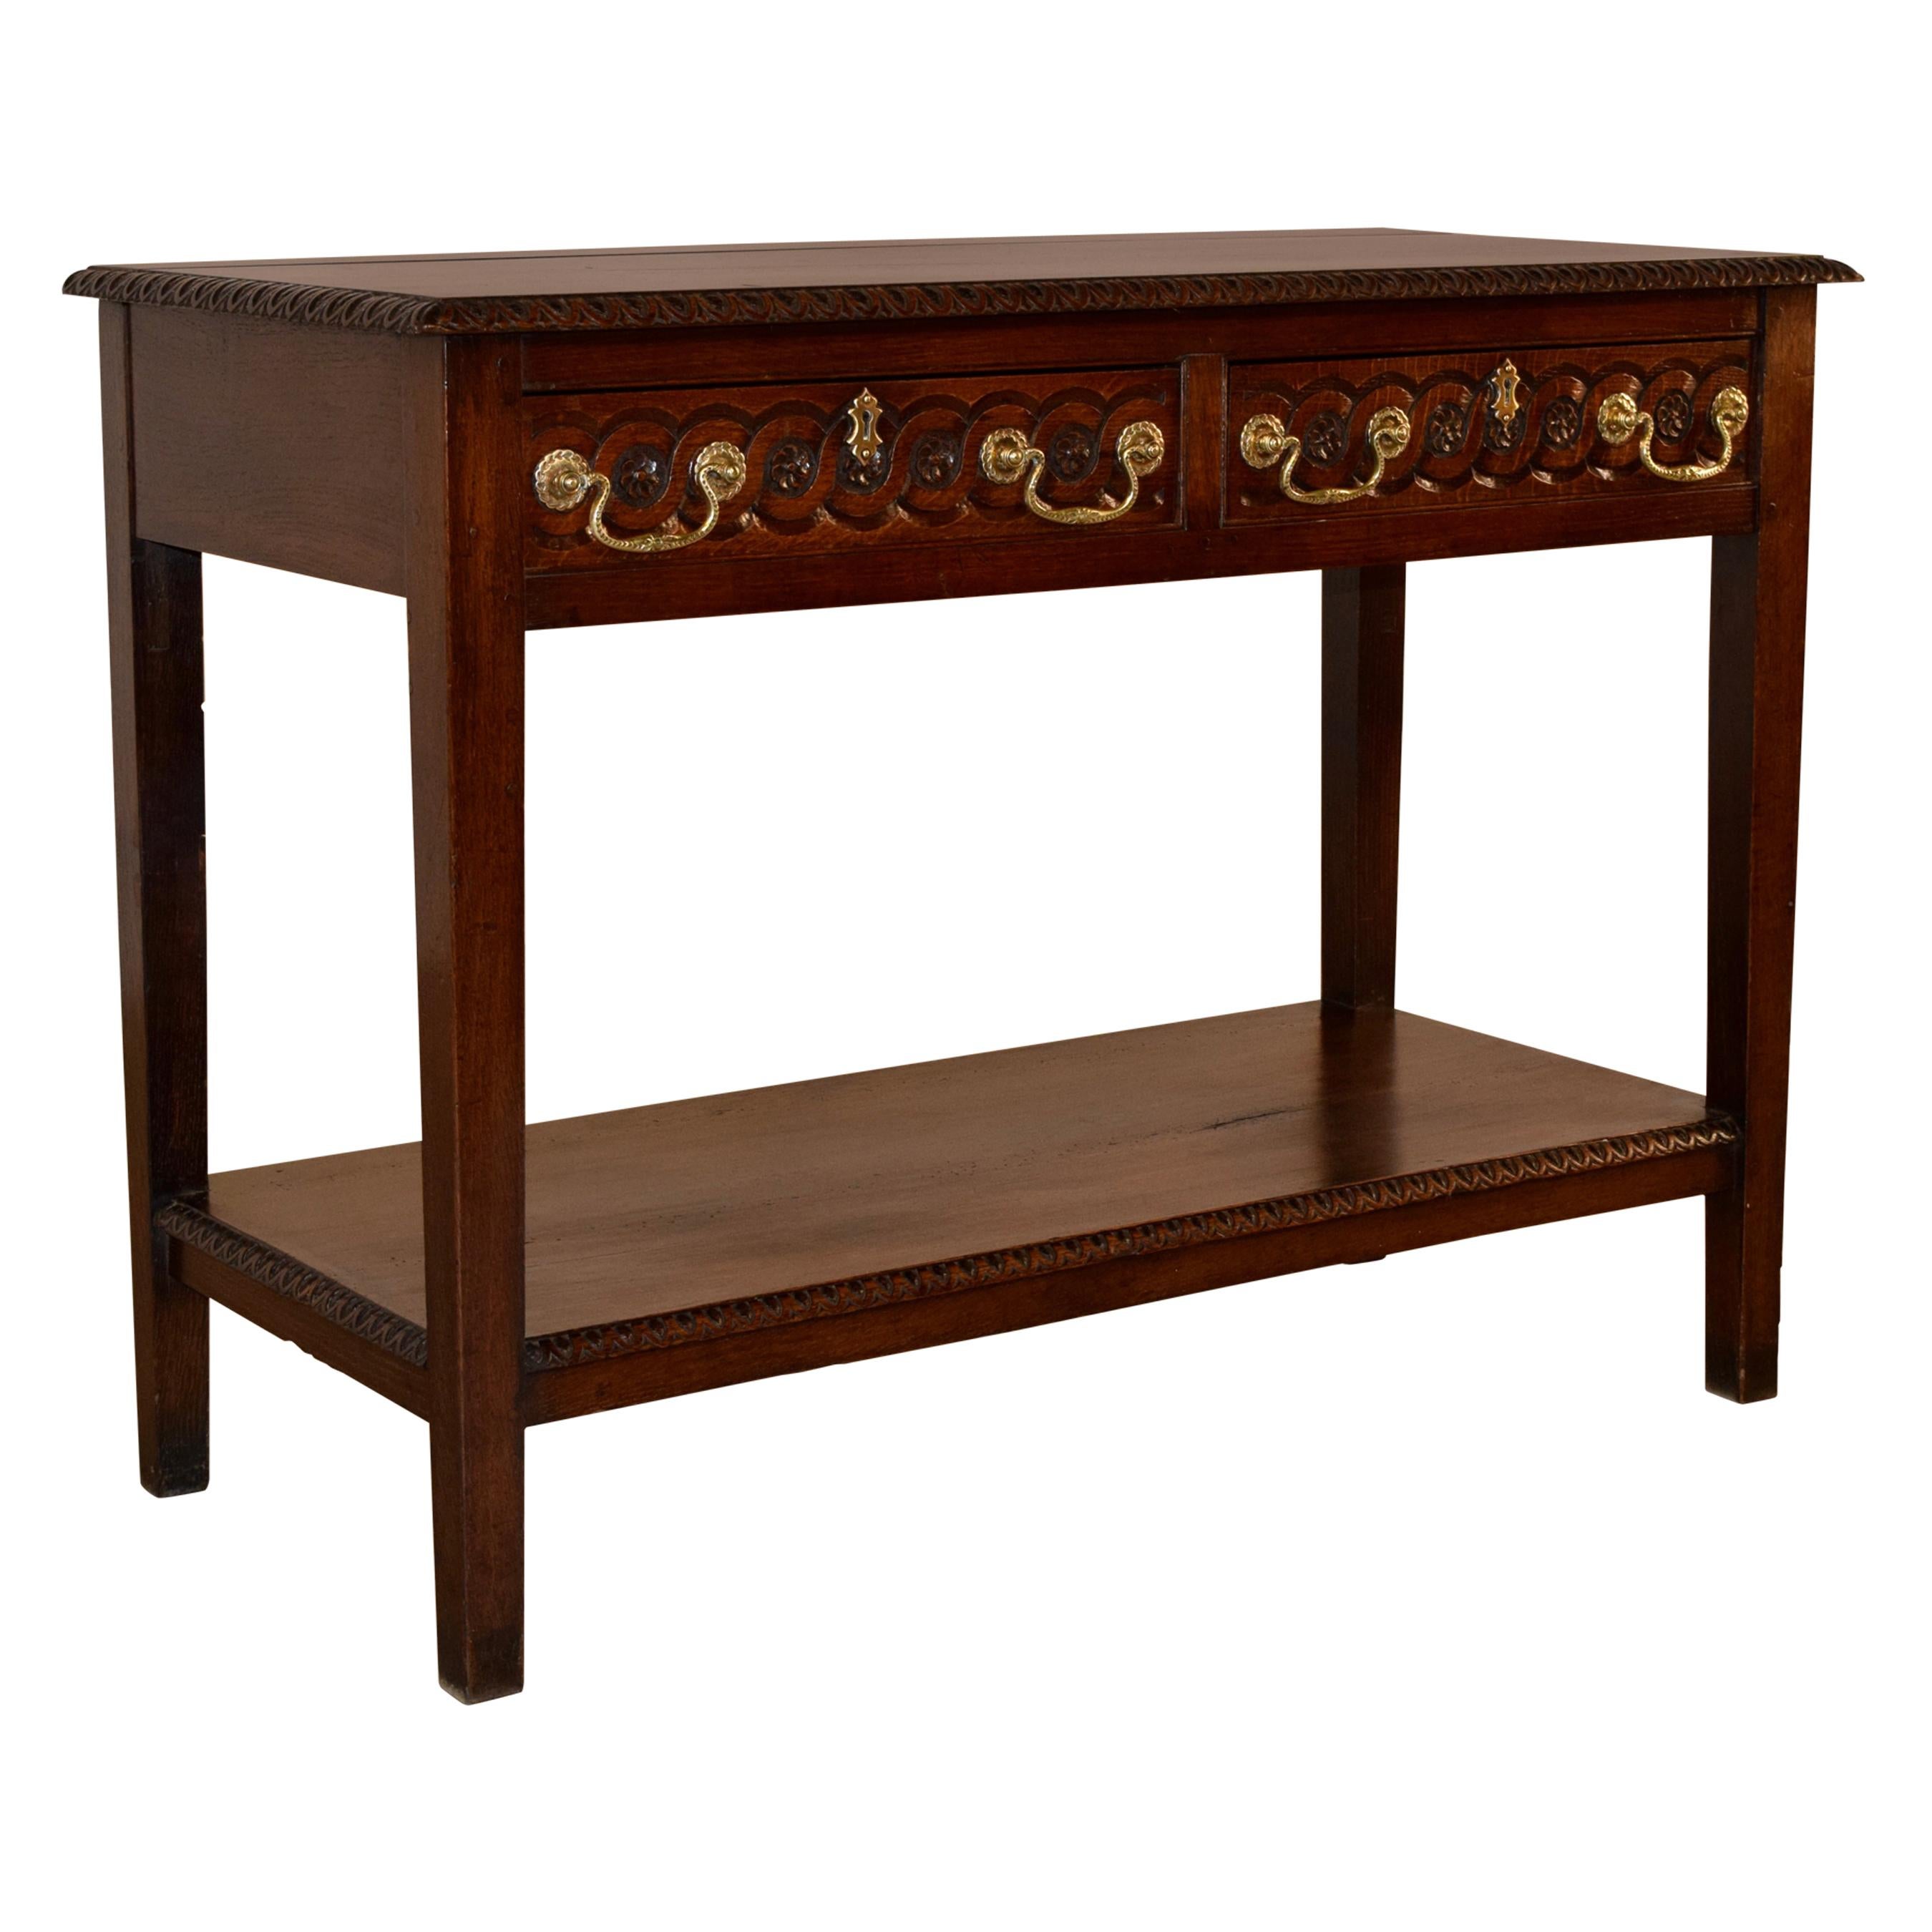 Early 19th Century English Console Table